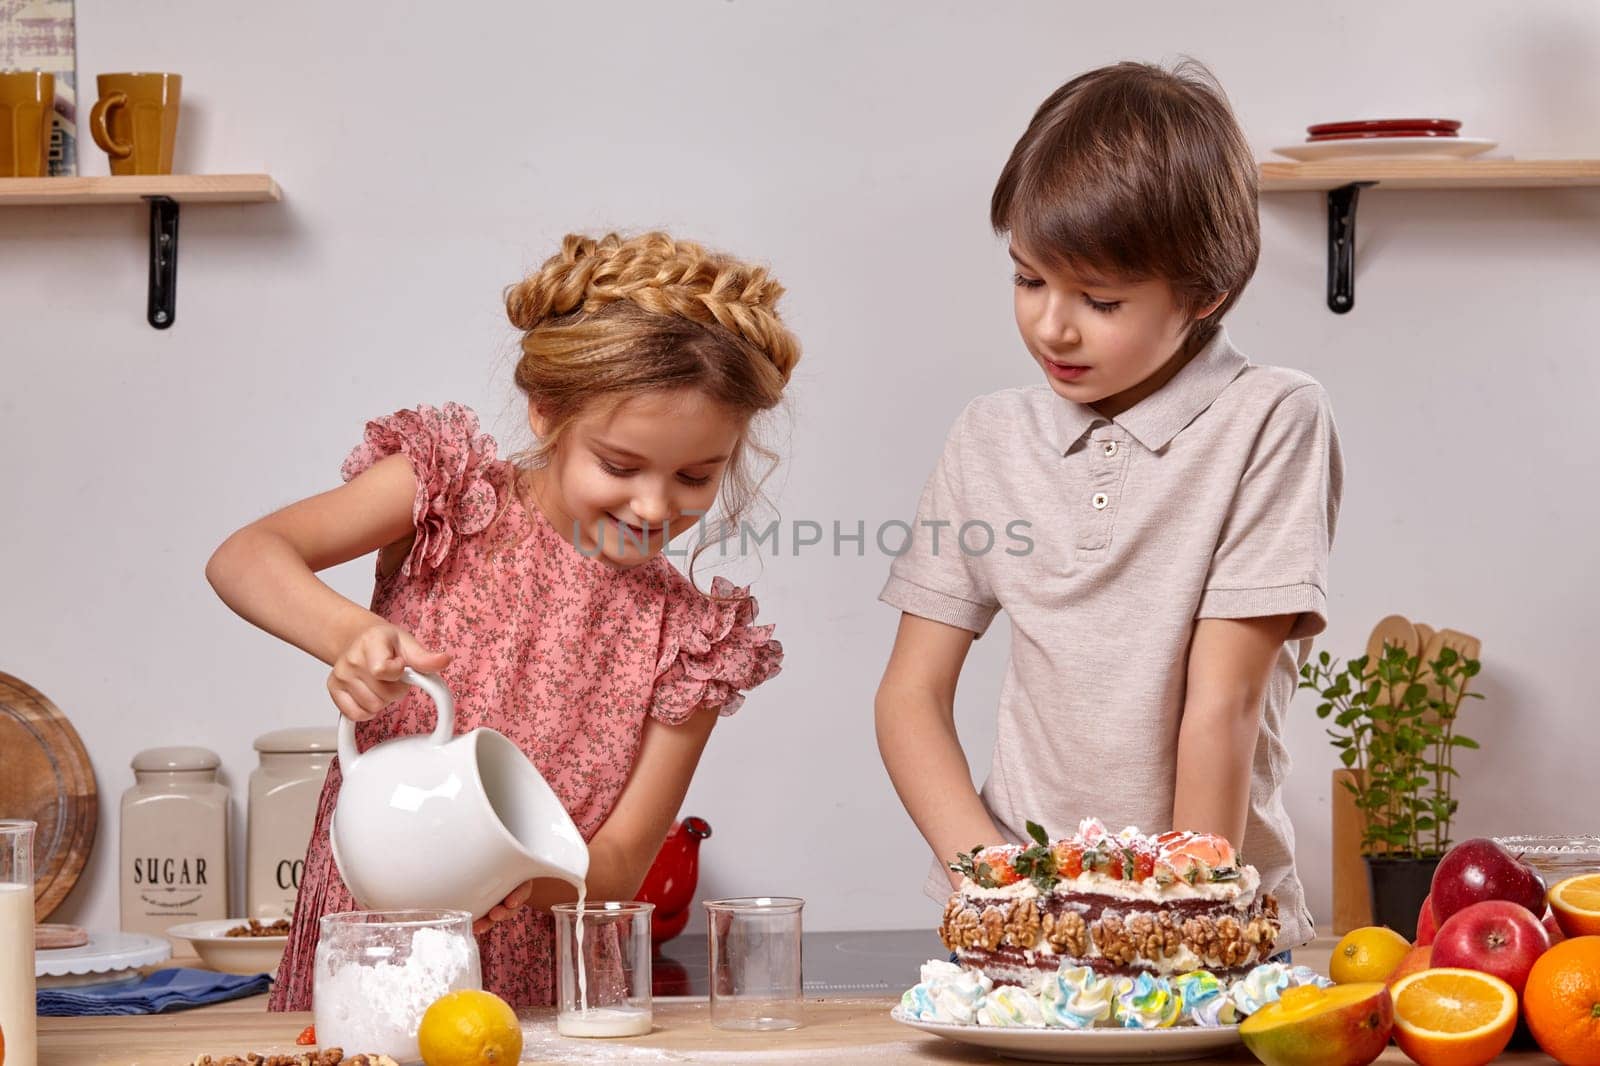 Little brunette boy dressed in a light t-shirt and jeans and a beautiful girl wearing in a pink dress are making a cake at a kitchen, against a white wall with shelves on it. Girl is pouring some milk in a glass.